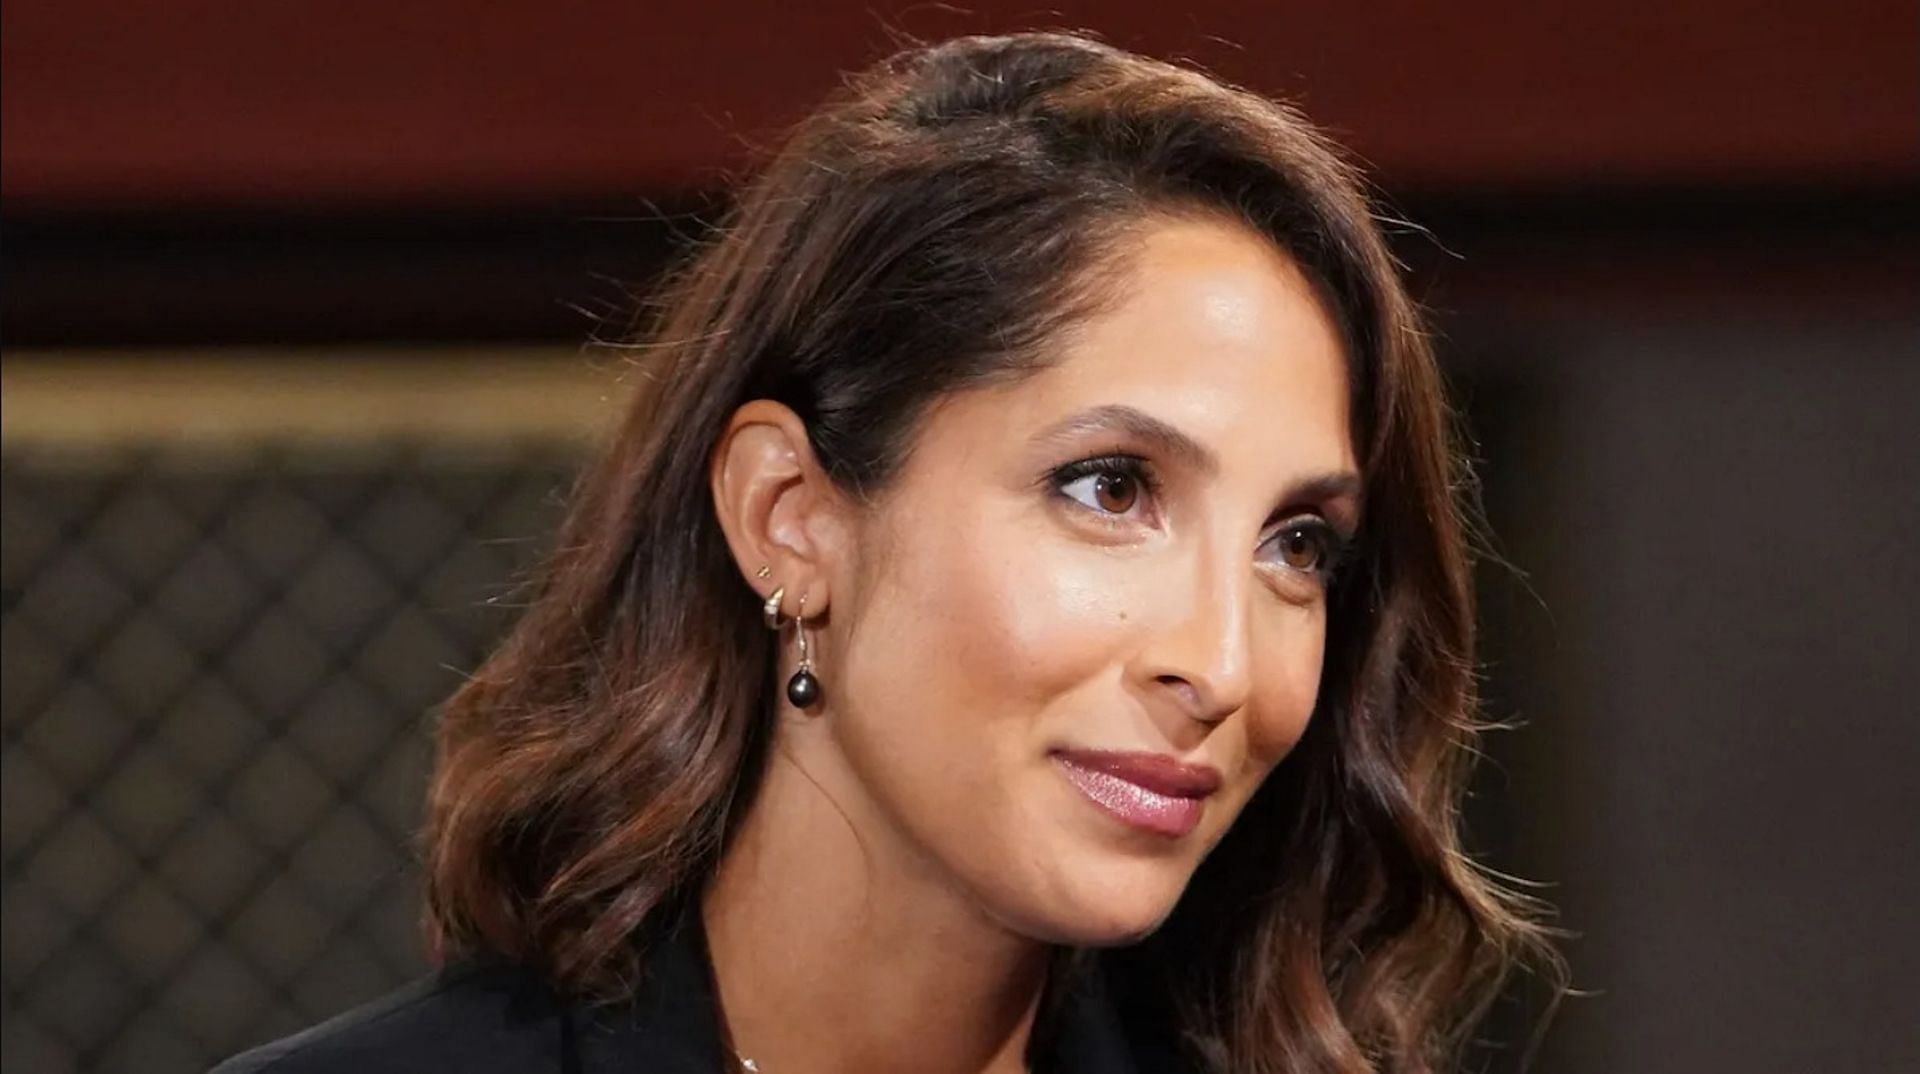 Christel Khalil as Lily Winters in The Young and the Restless (Image via CBS)